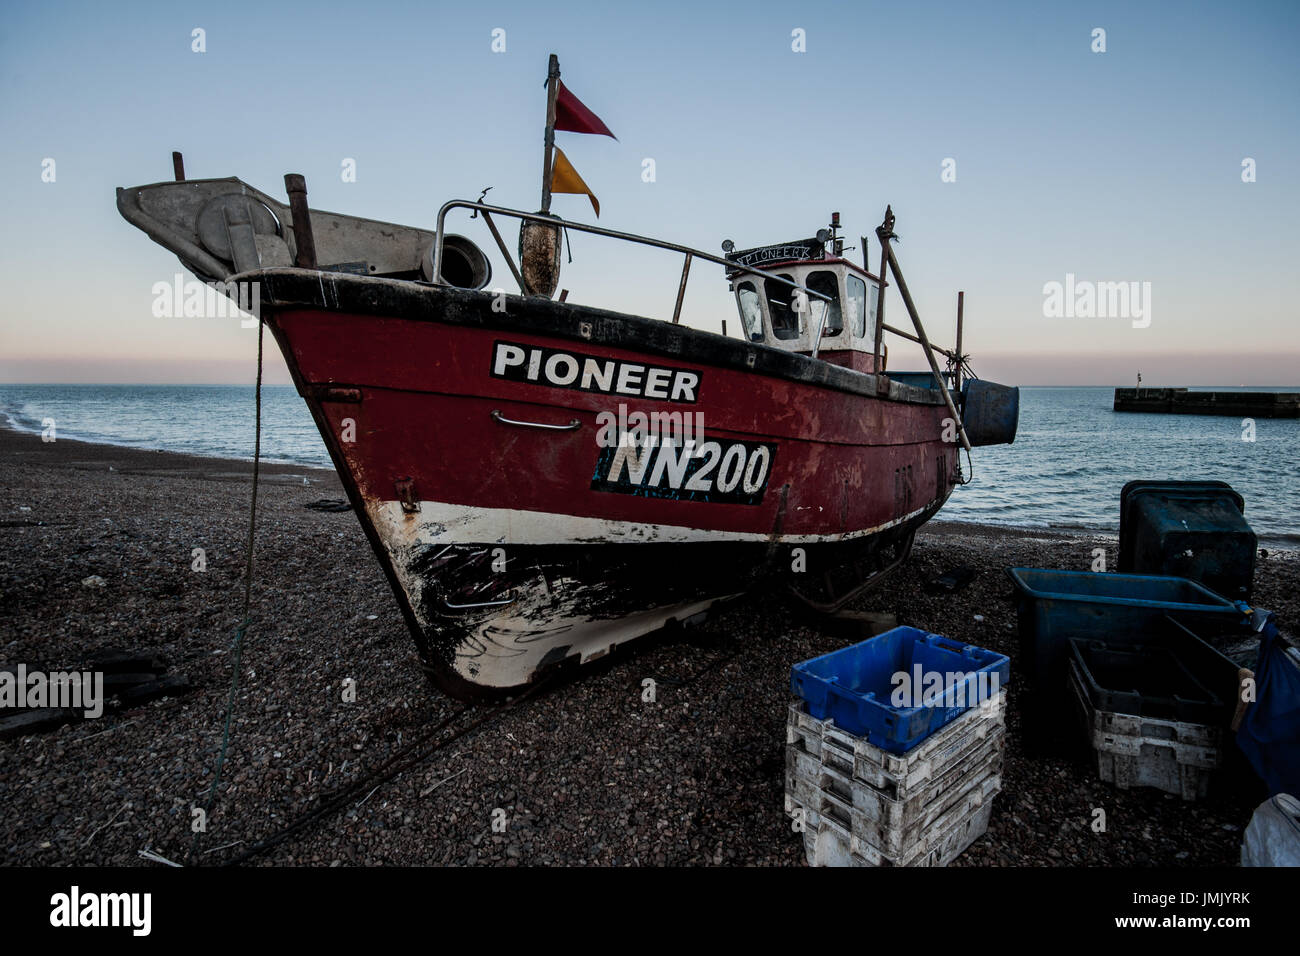 Fishing boat on The Stade in Hastings, East Sussex, England, UK Stock Photo